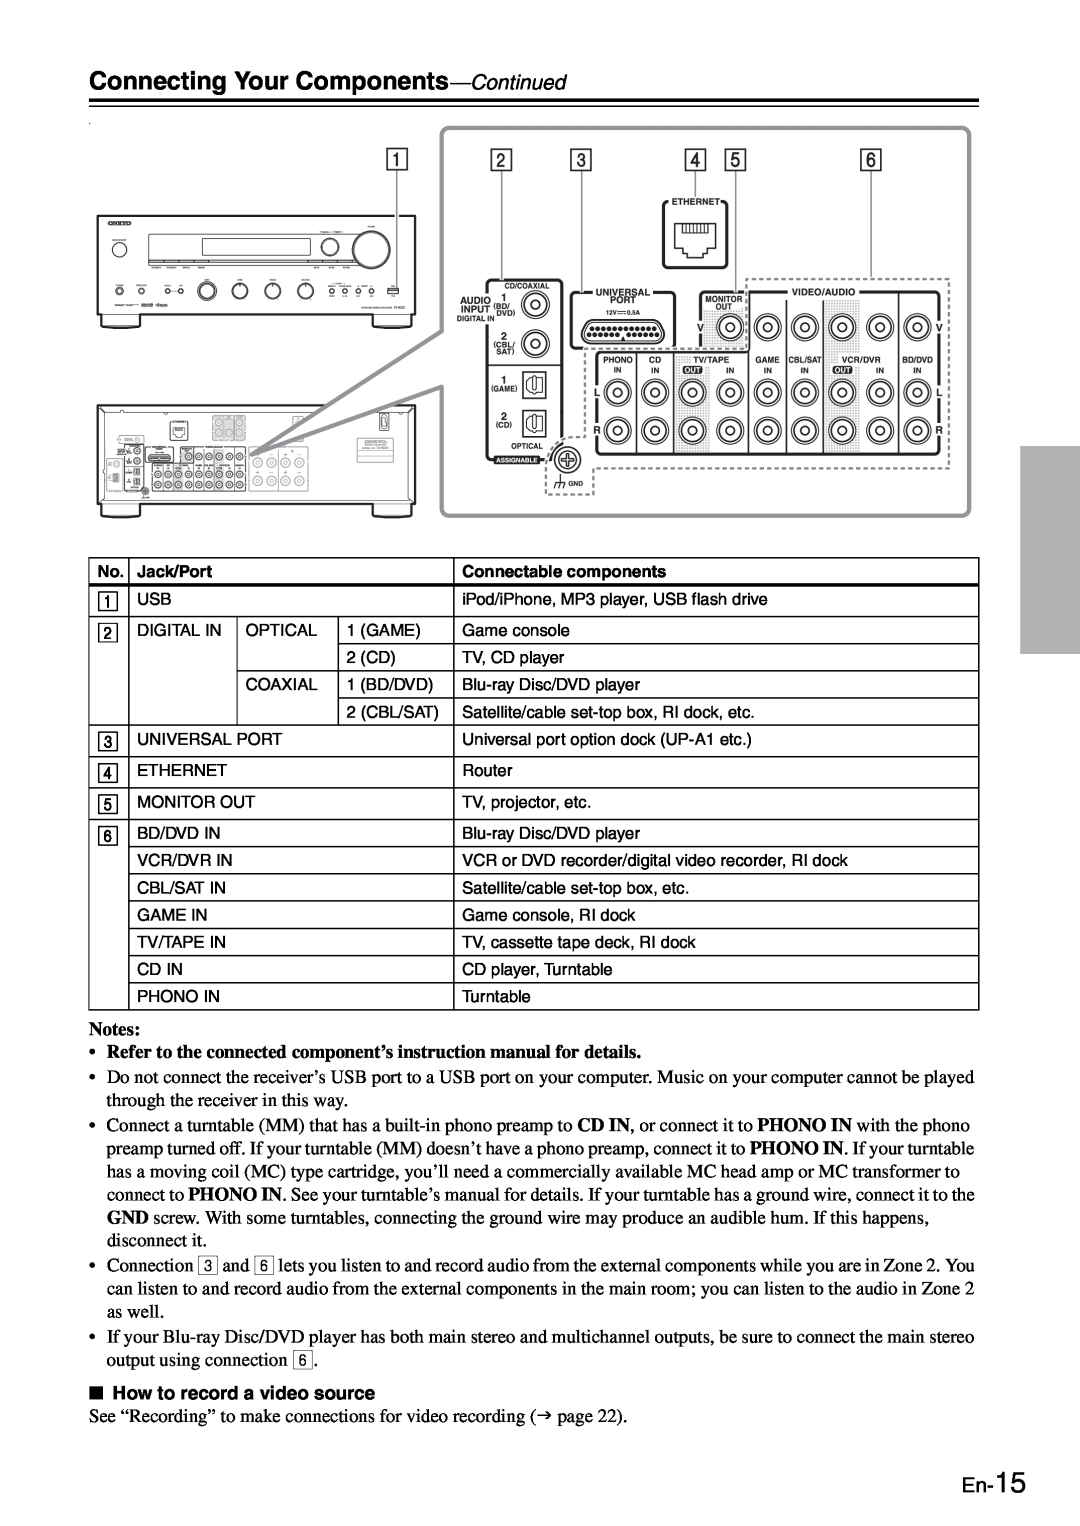 Onkyo TX-8050 instruction manual Connecting Your Components—Continued, En-15, How to record a video source 